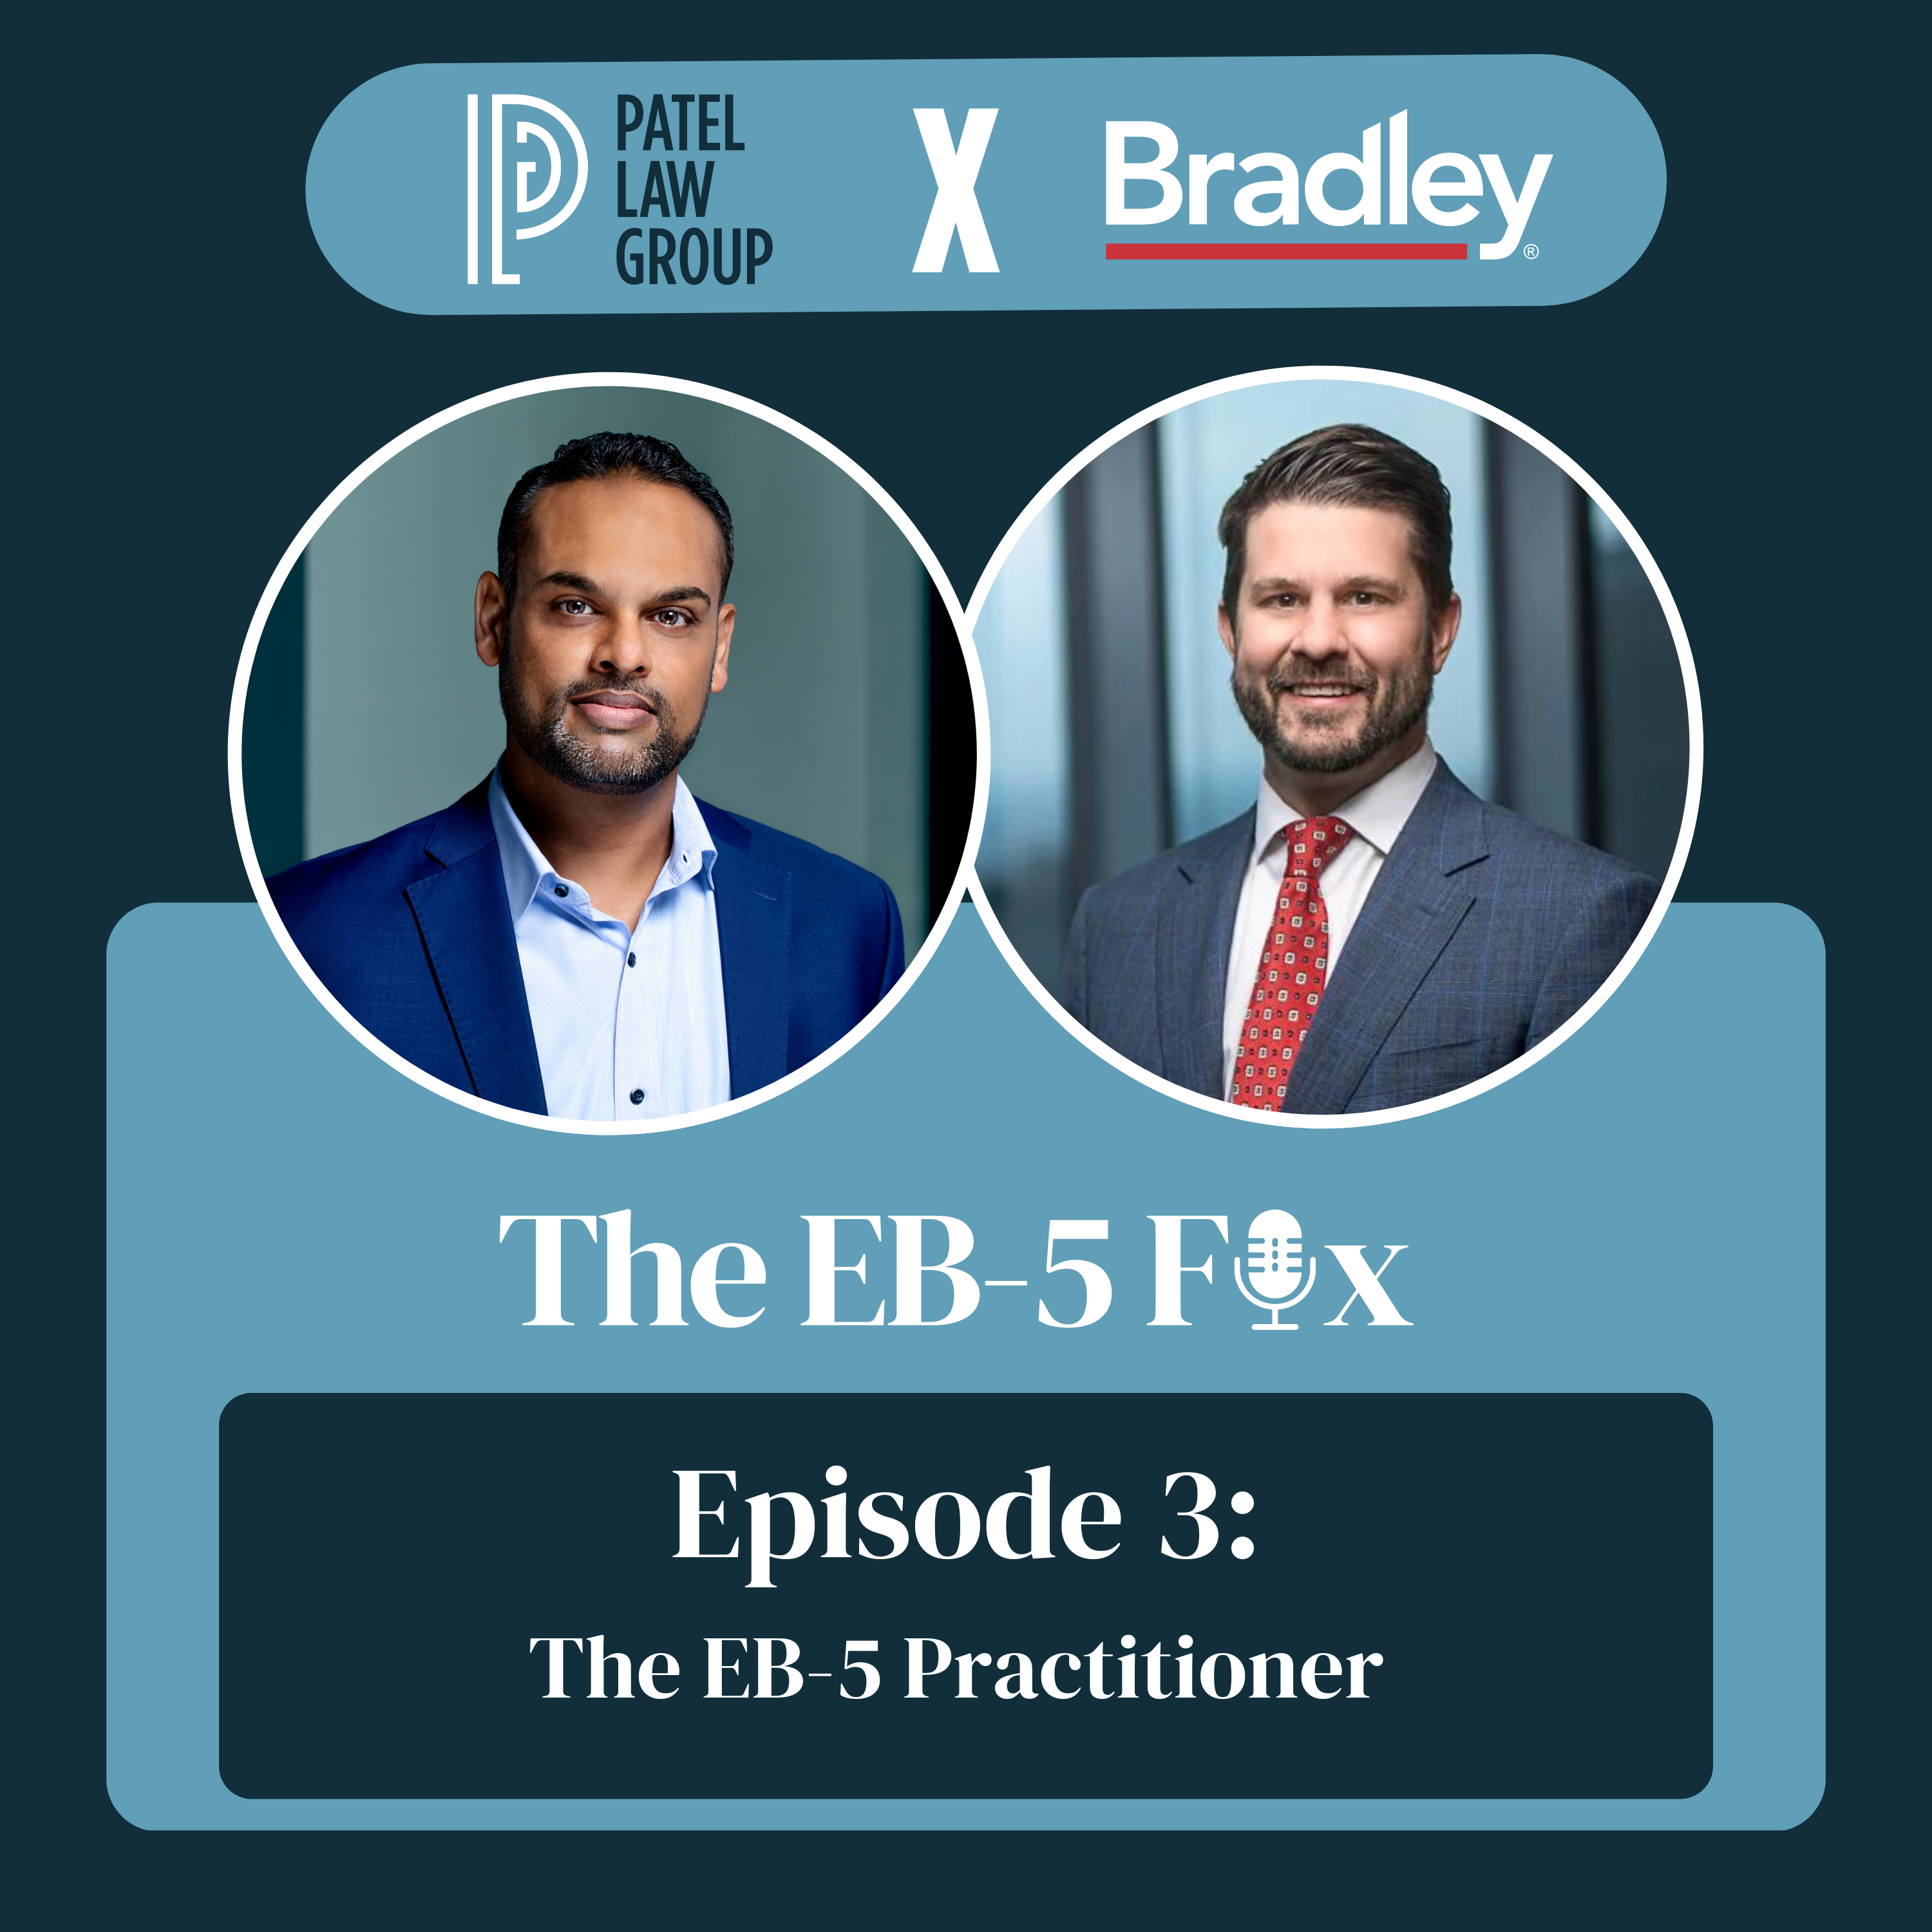 Episode 3 - The EB-5 Practitioner